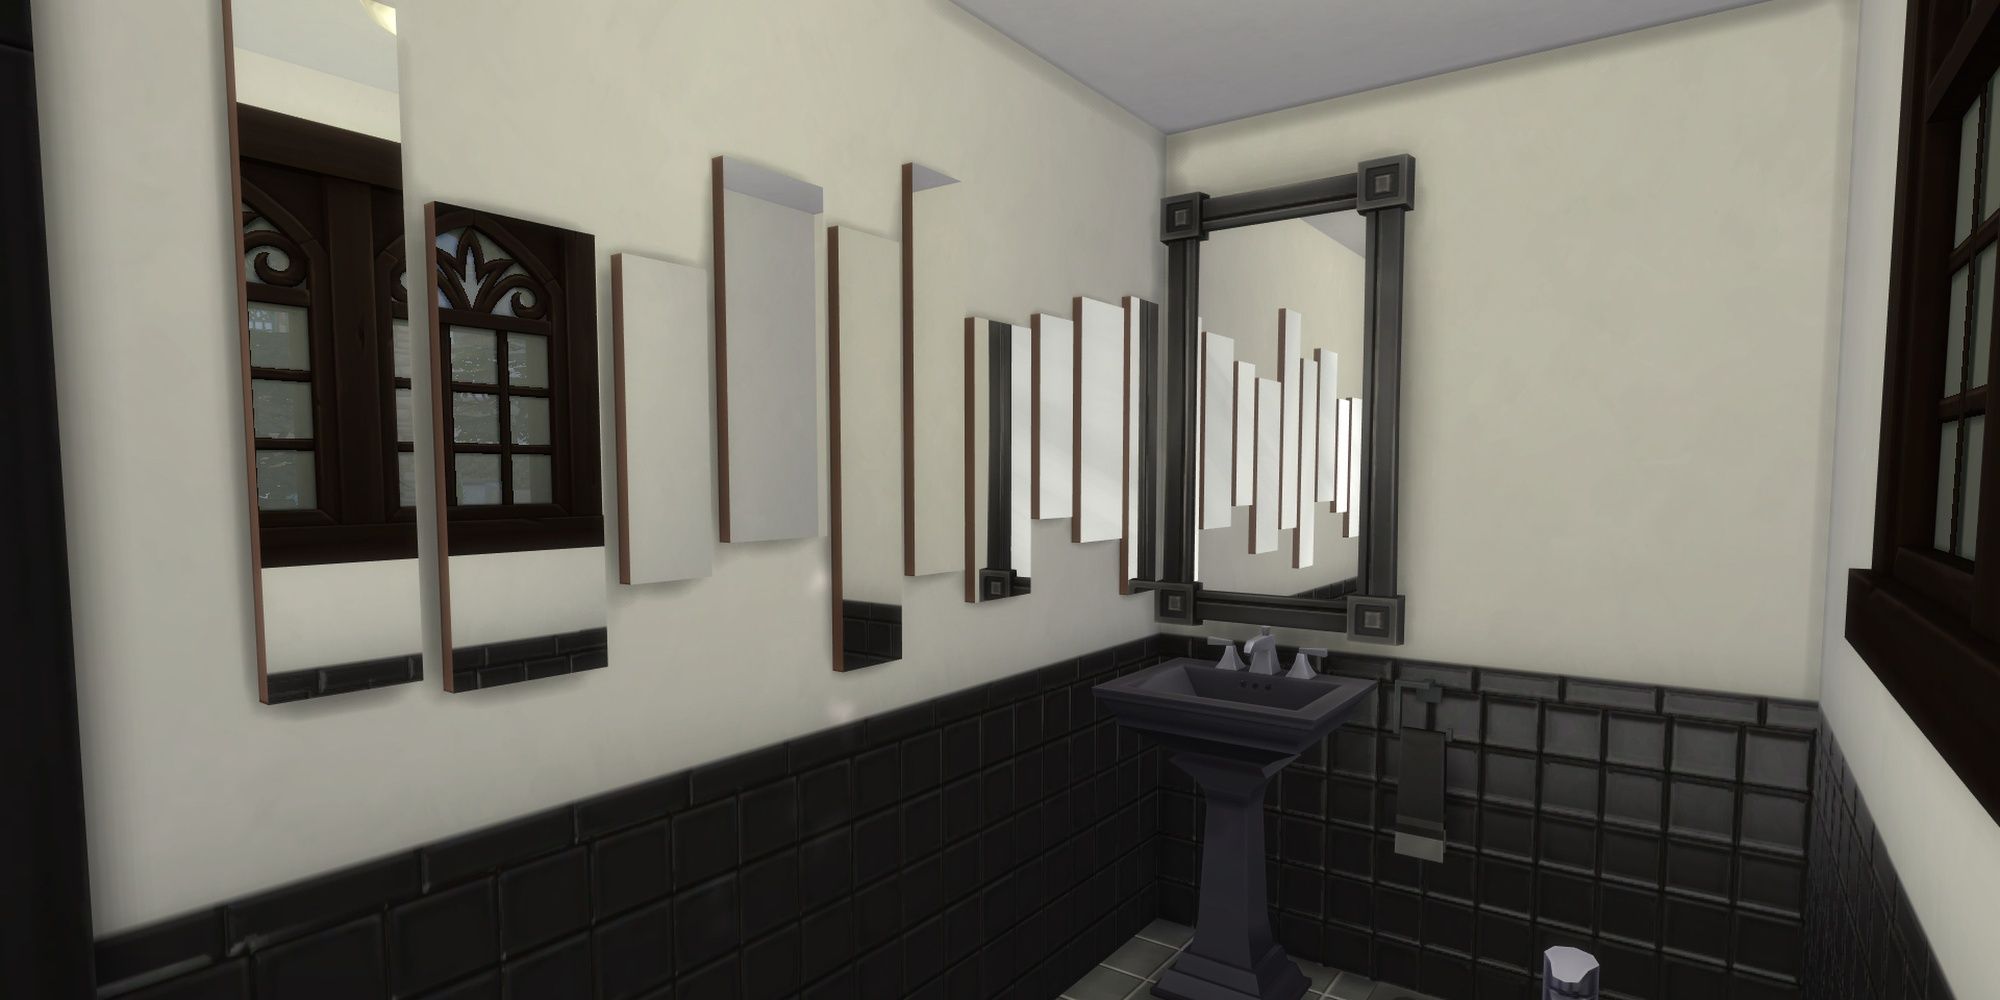 Panels of Self Mirror from The Sims 4: Decor to the Max